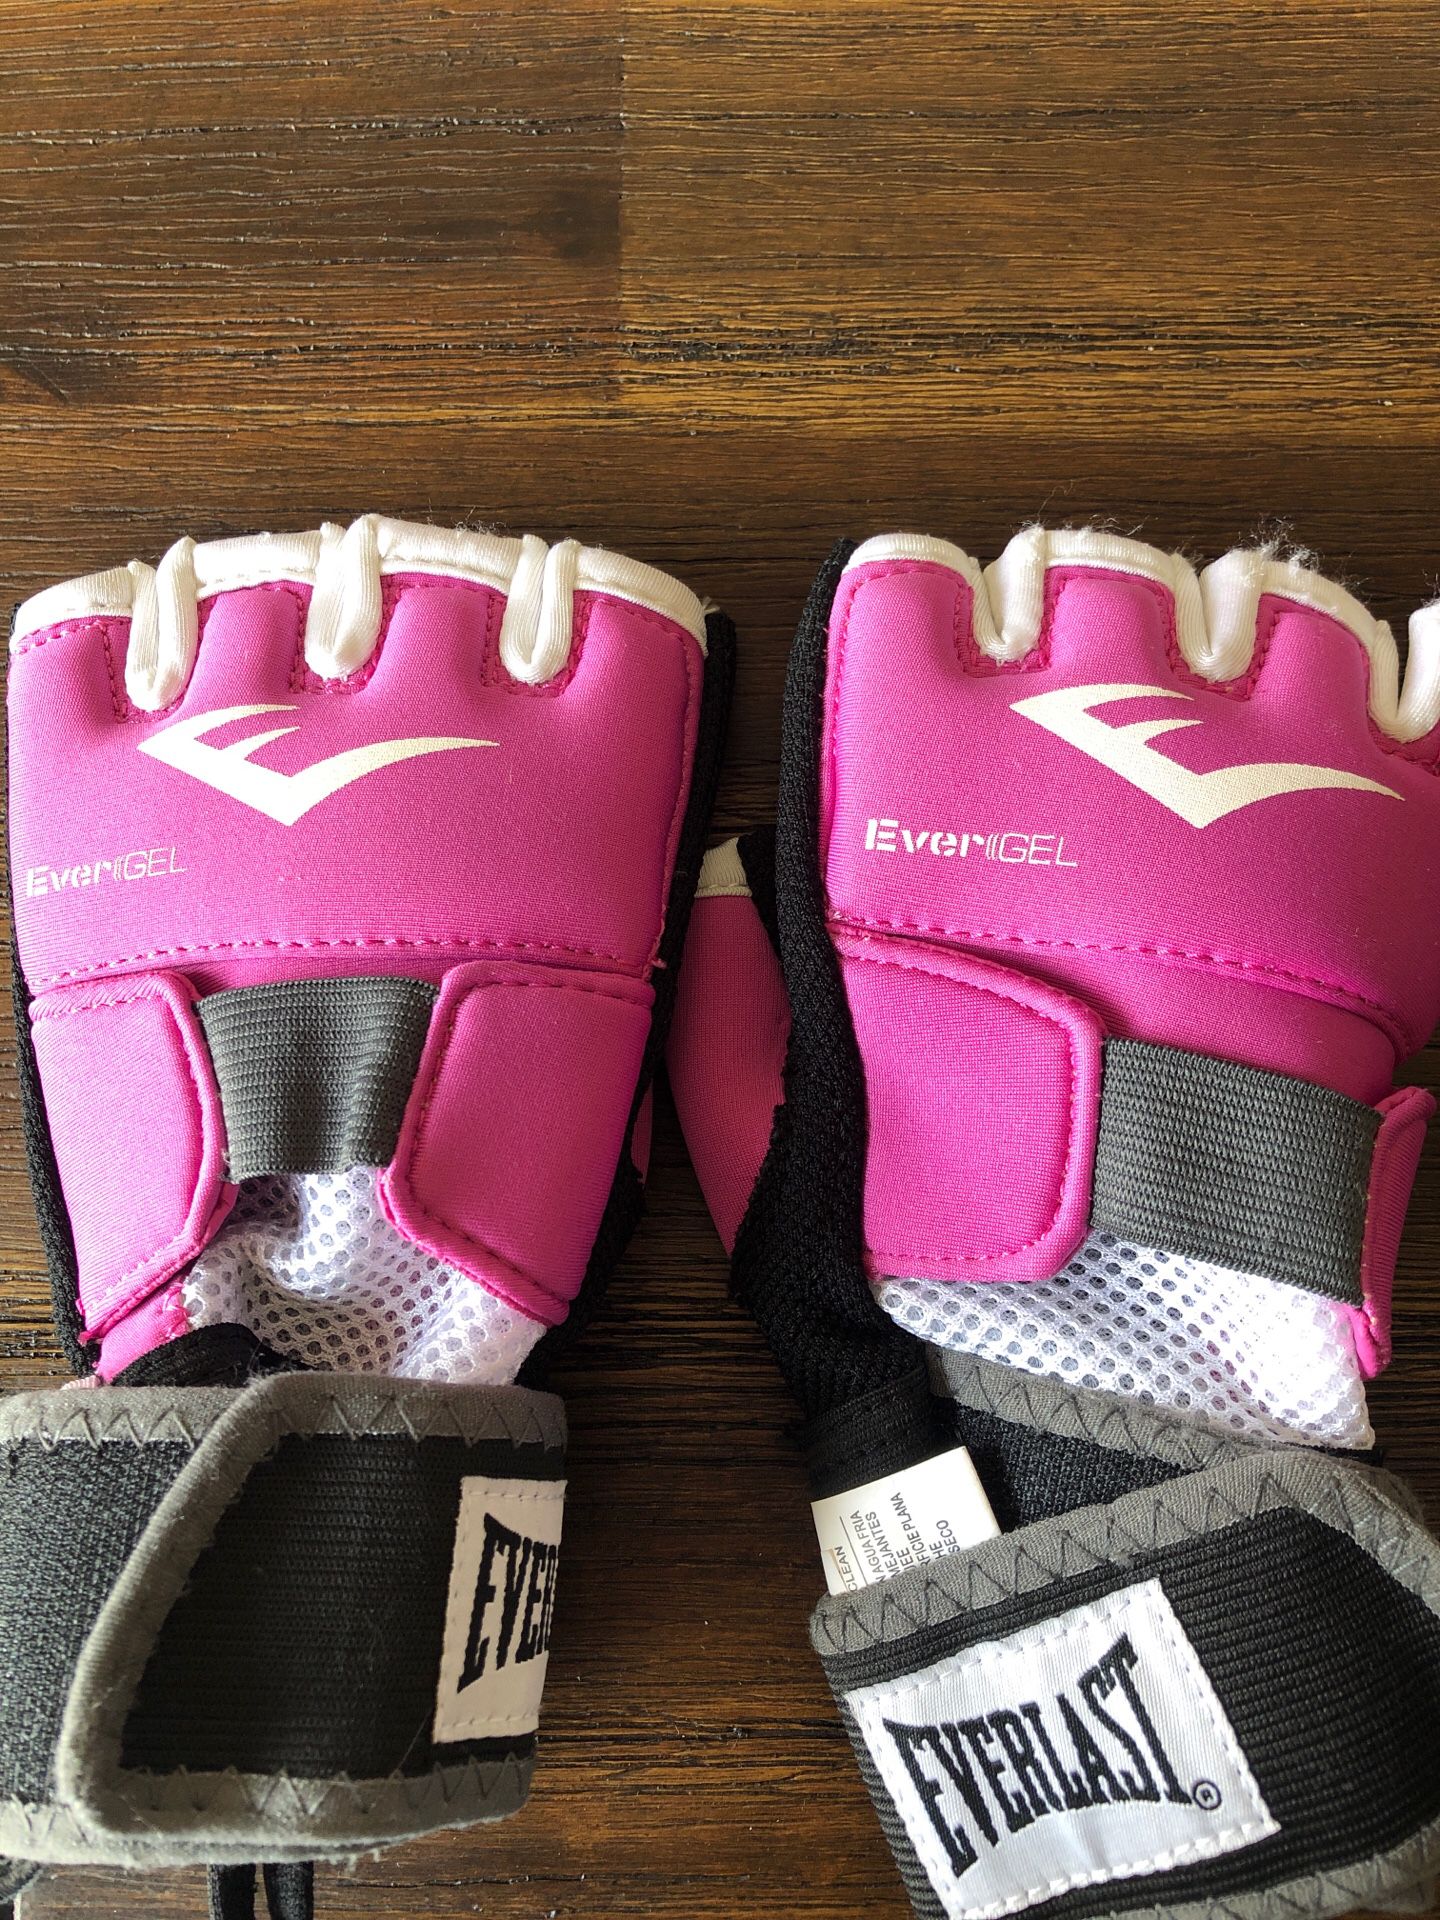 Boxing gloves (women’s small)